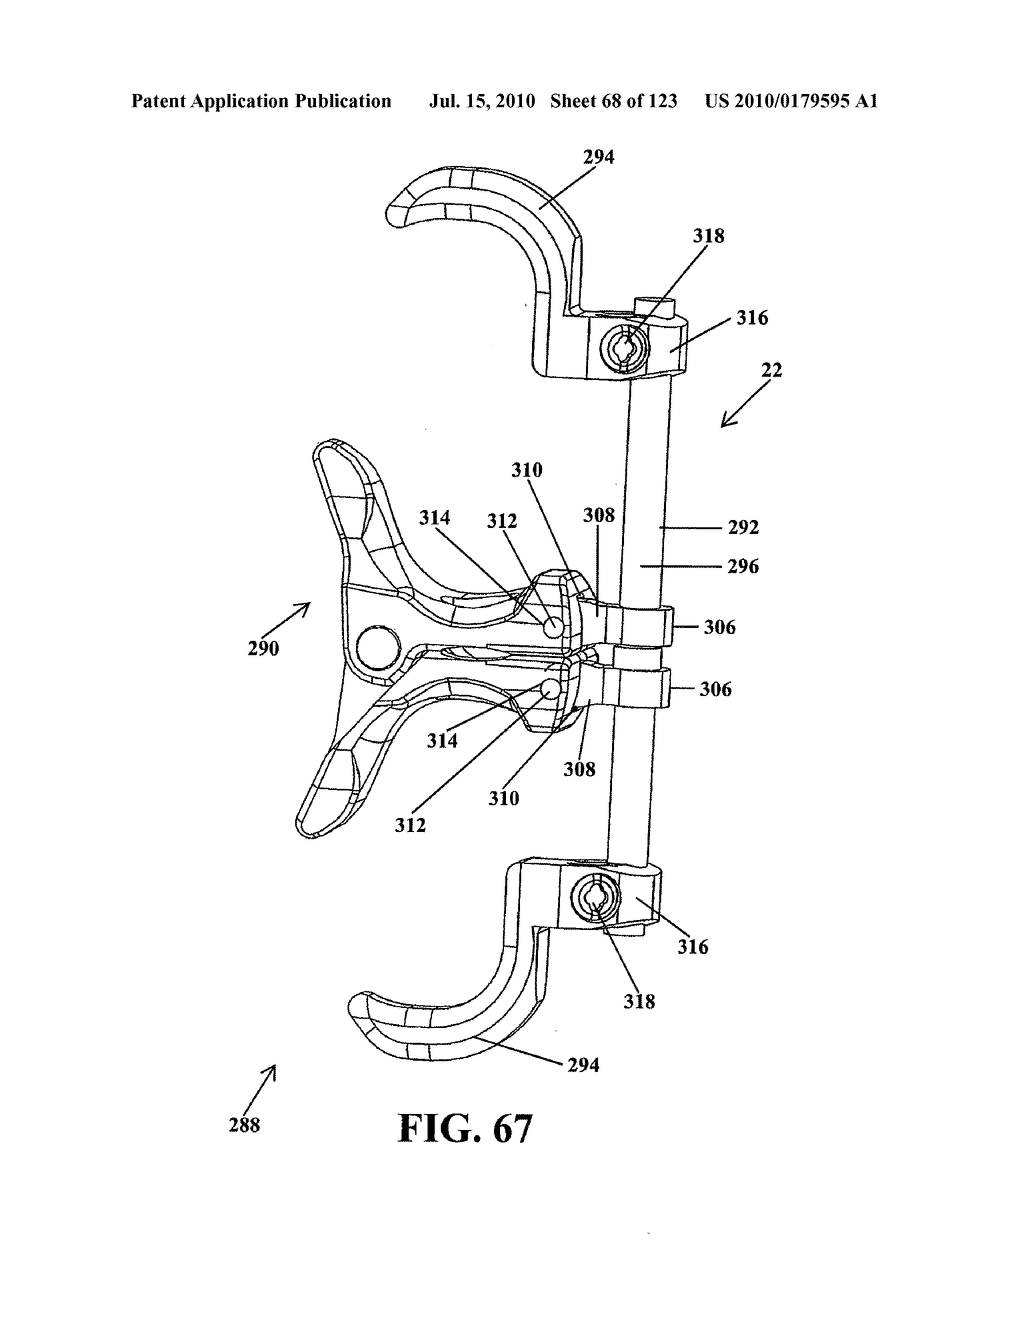 Intervertebral Implant Devices and Methods for Insertion Thereof - diagram, schematic, and image 69